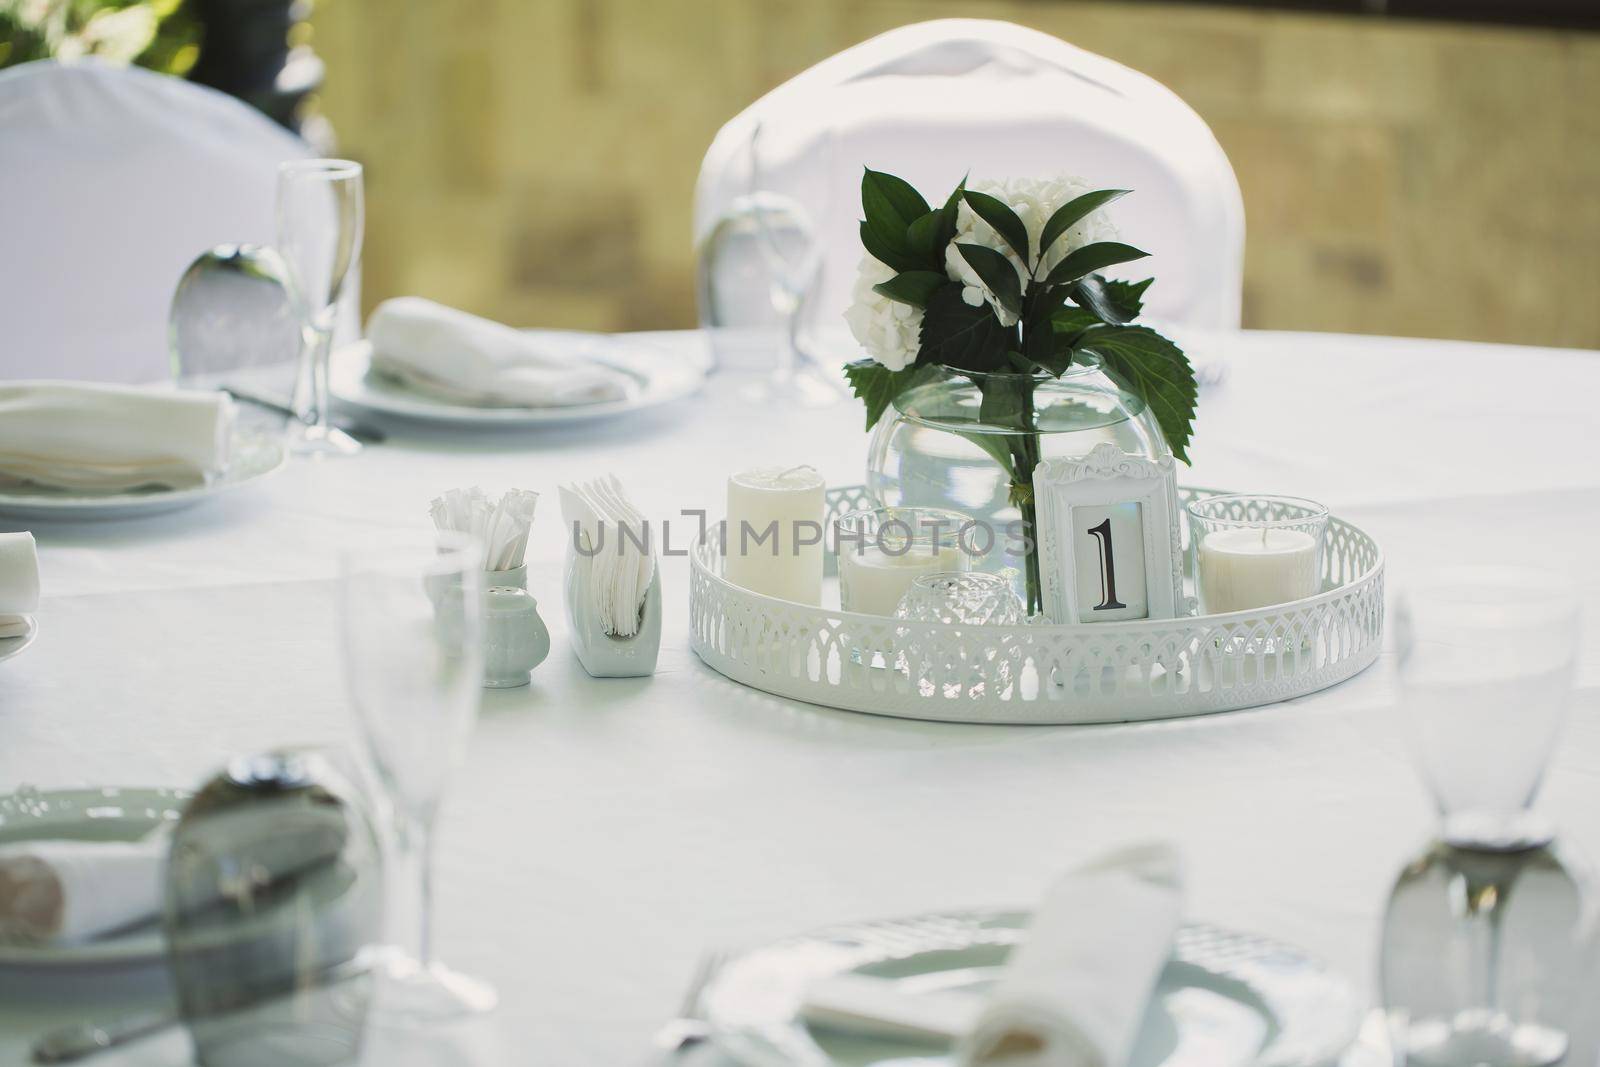 Beautifully decorated tables for guests with decorations